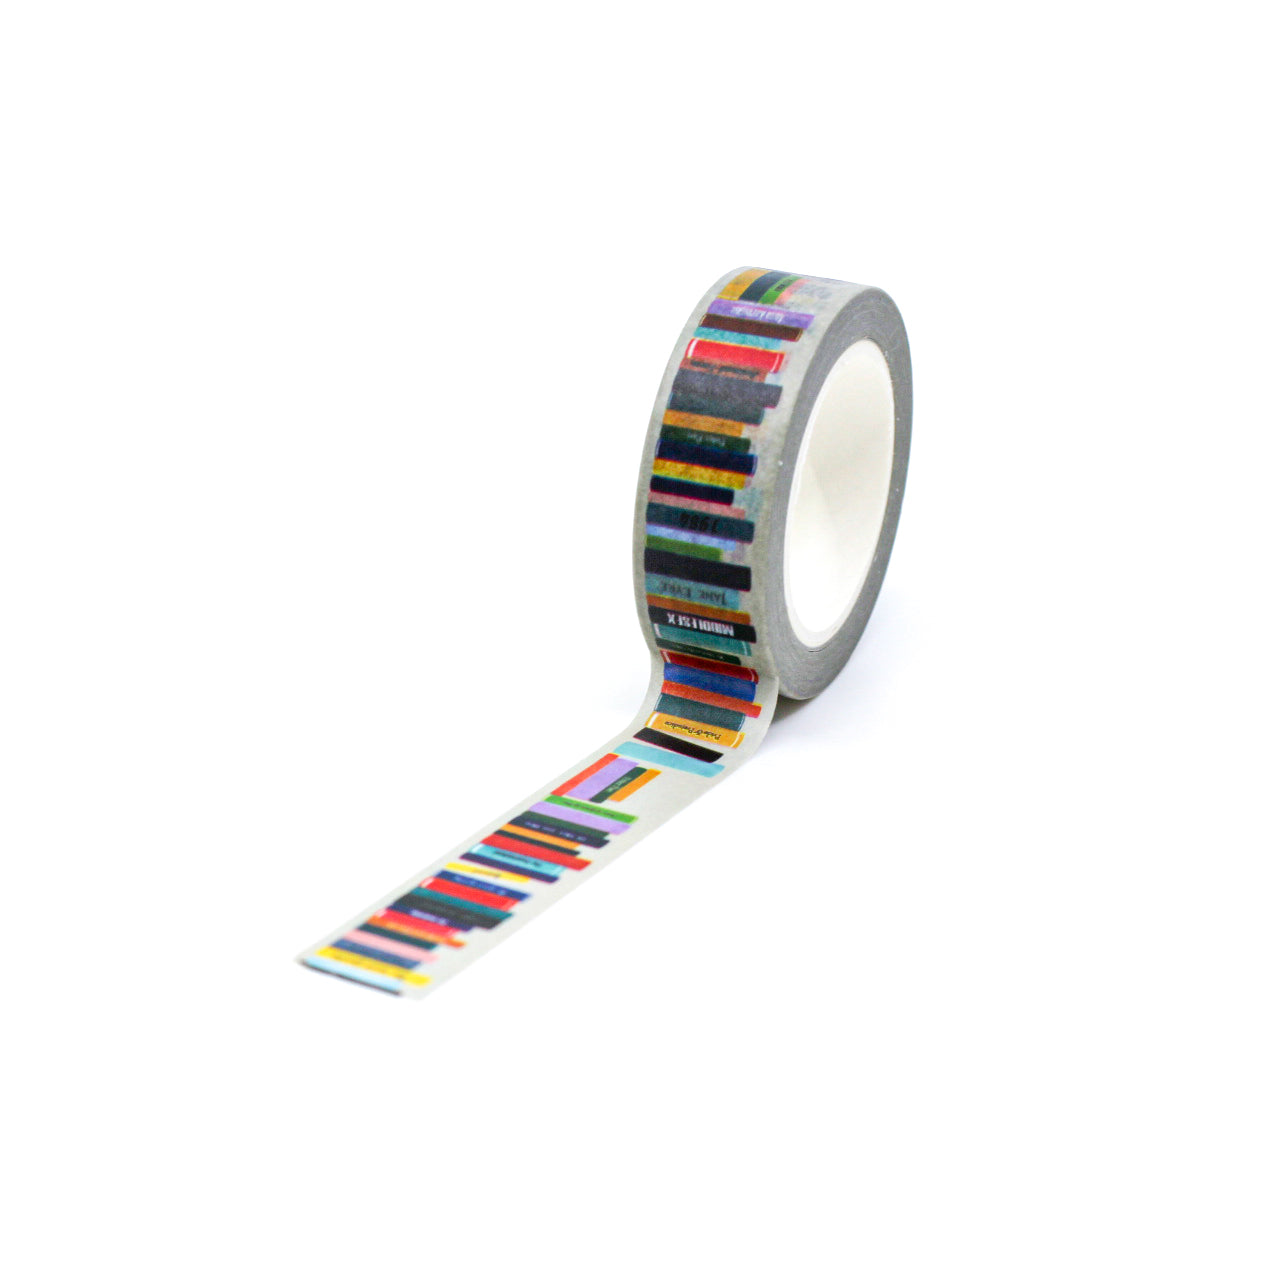 Immerse yourself in the world of literature with our Bookstack Reading Washi Tape, featuring a delightful stack of books. Ideal for celebrating your love of reading in your creative projects. This tape is from Beve and sold at BBB Supplies Craft Shop.